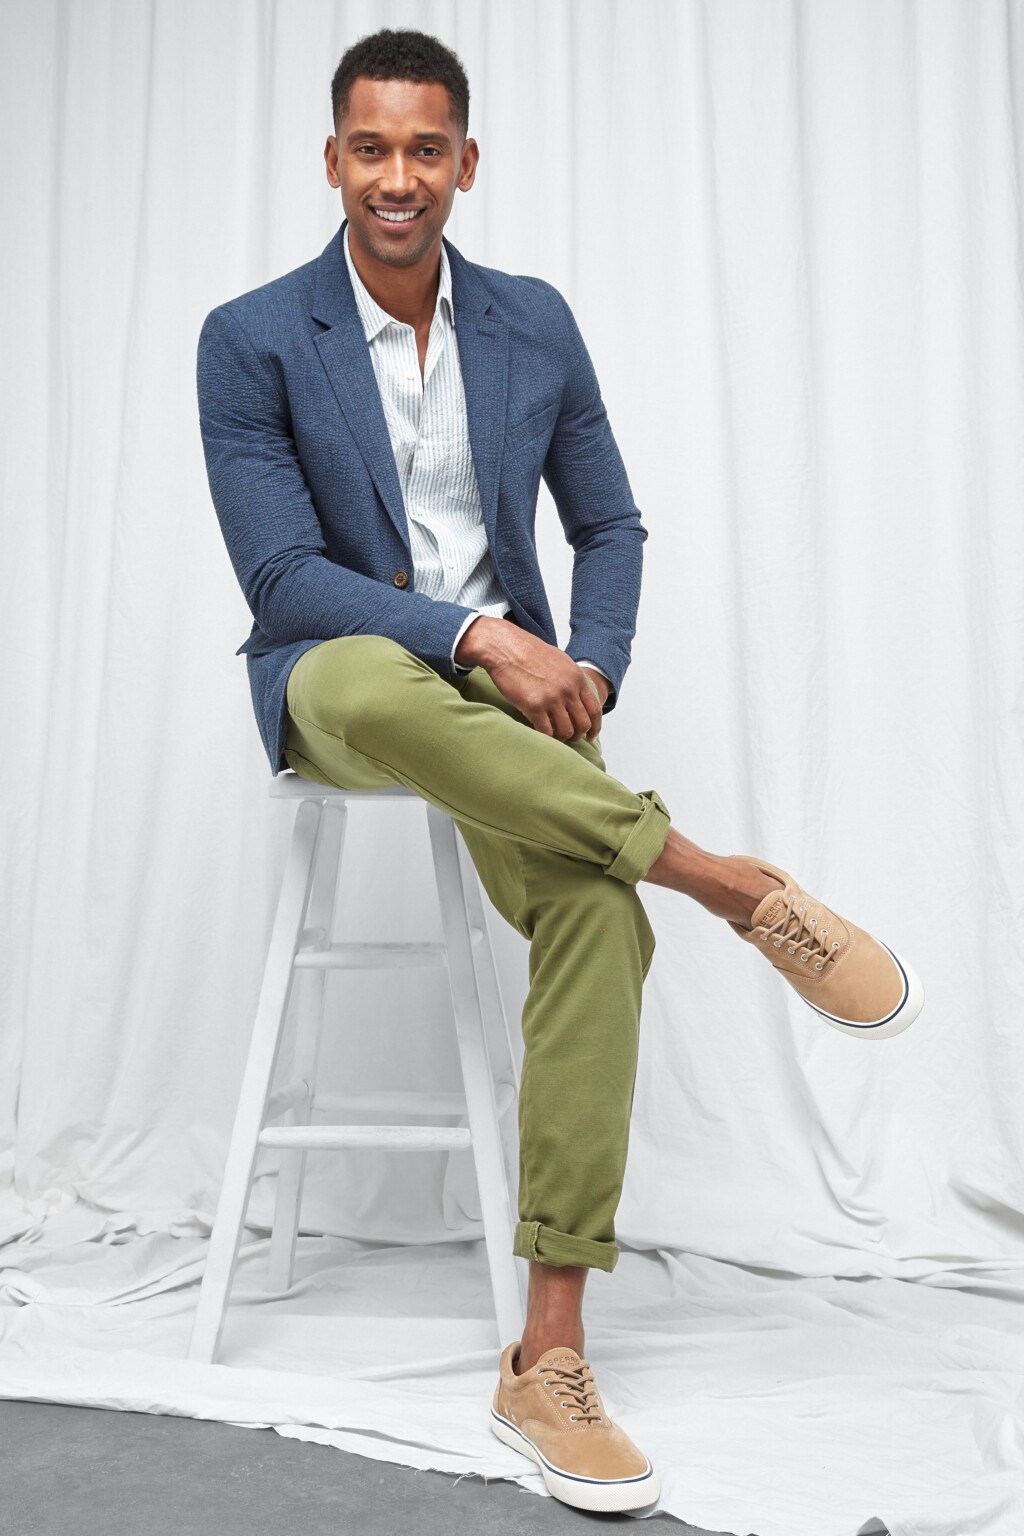 How to Dress for a Fall Wedding | Stitch Fix Men